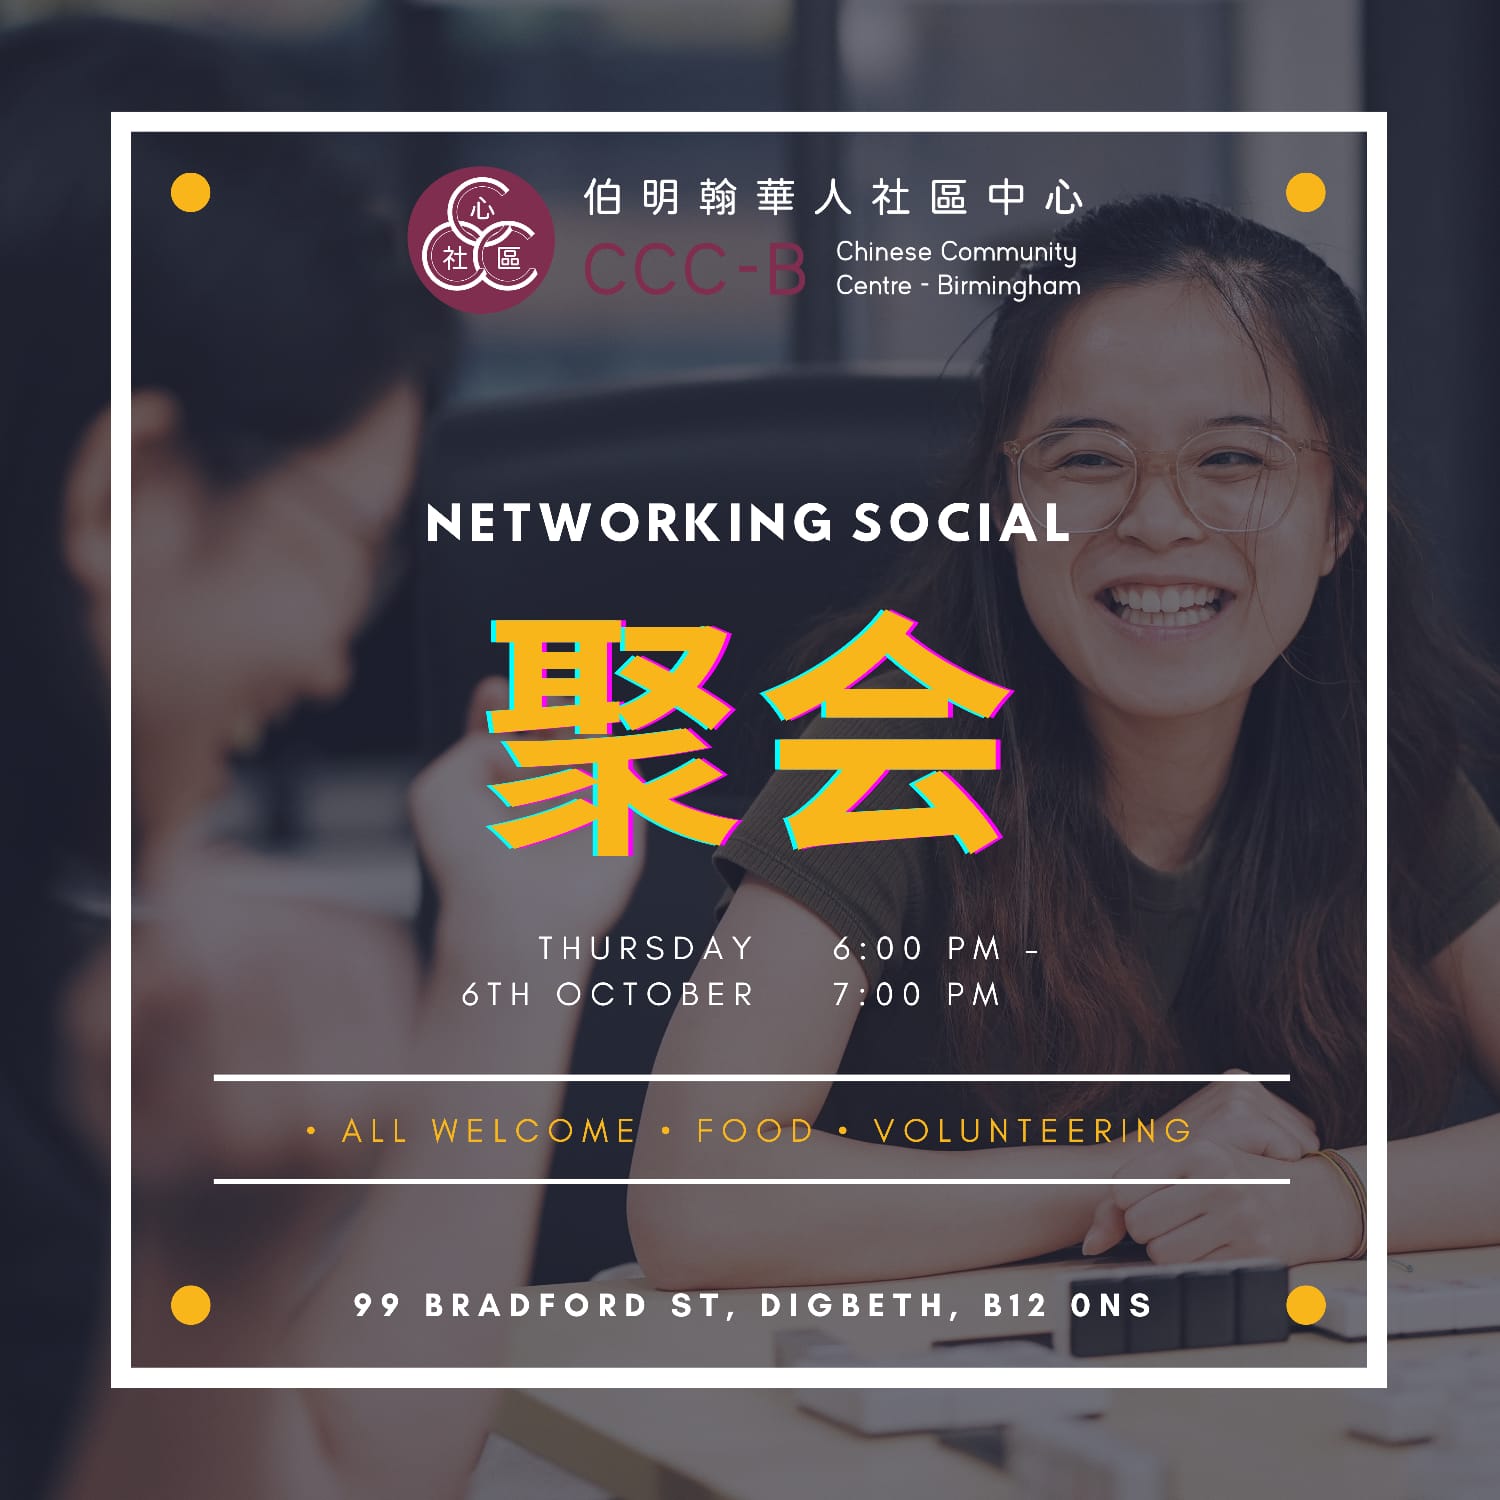 Networking Social – Birmingham Chinese and East Asian Community